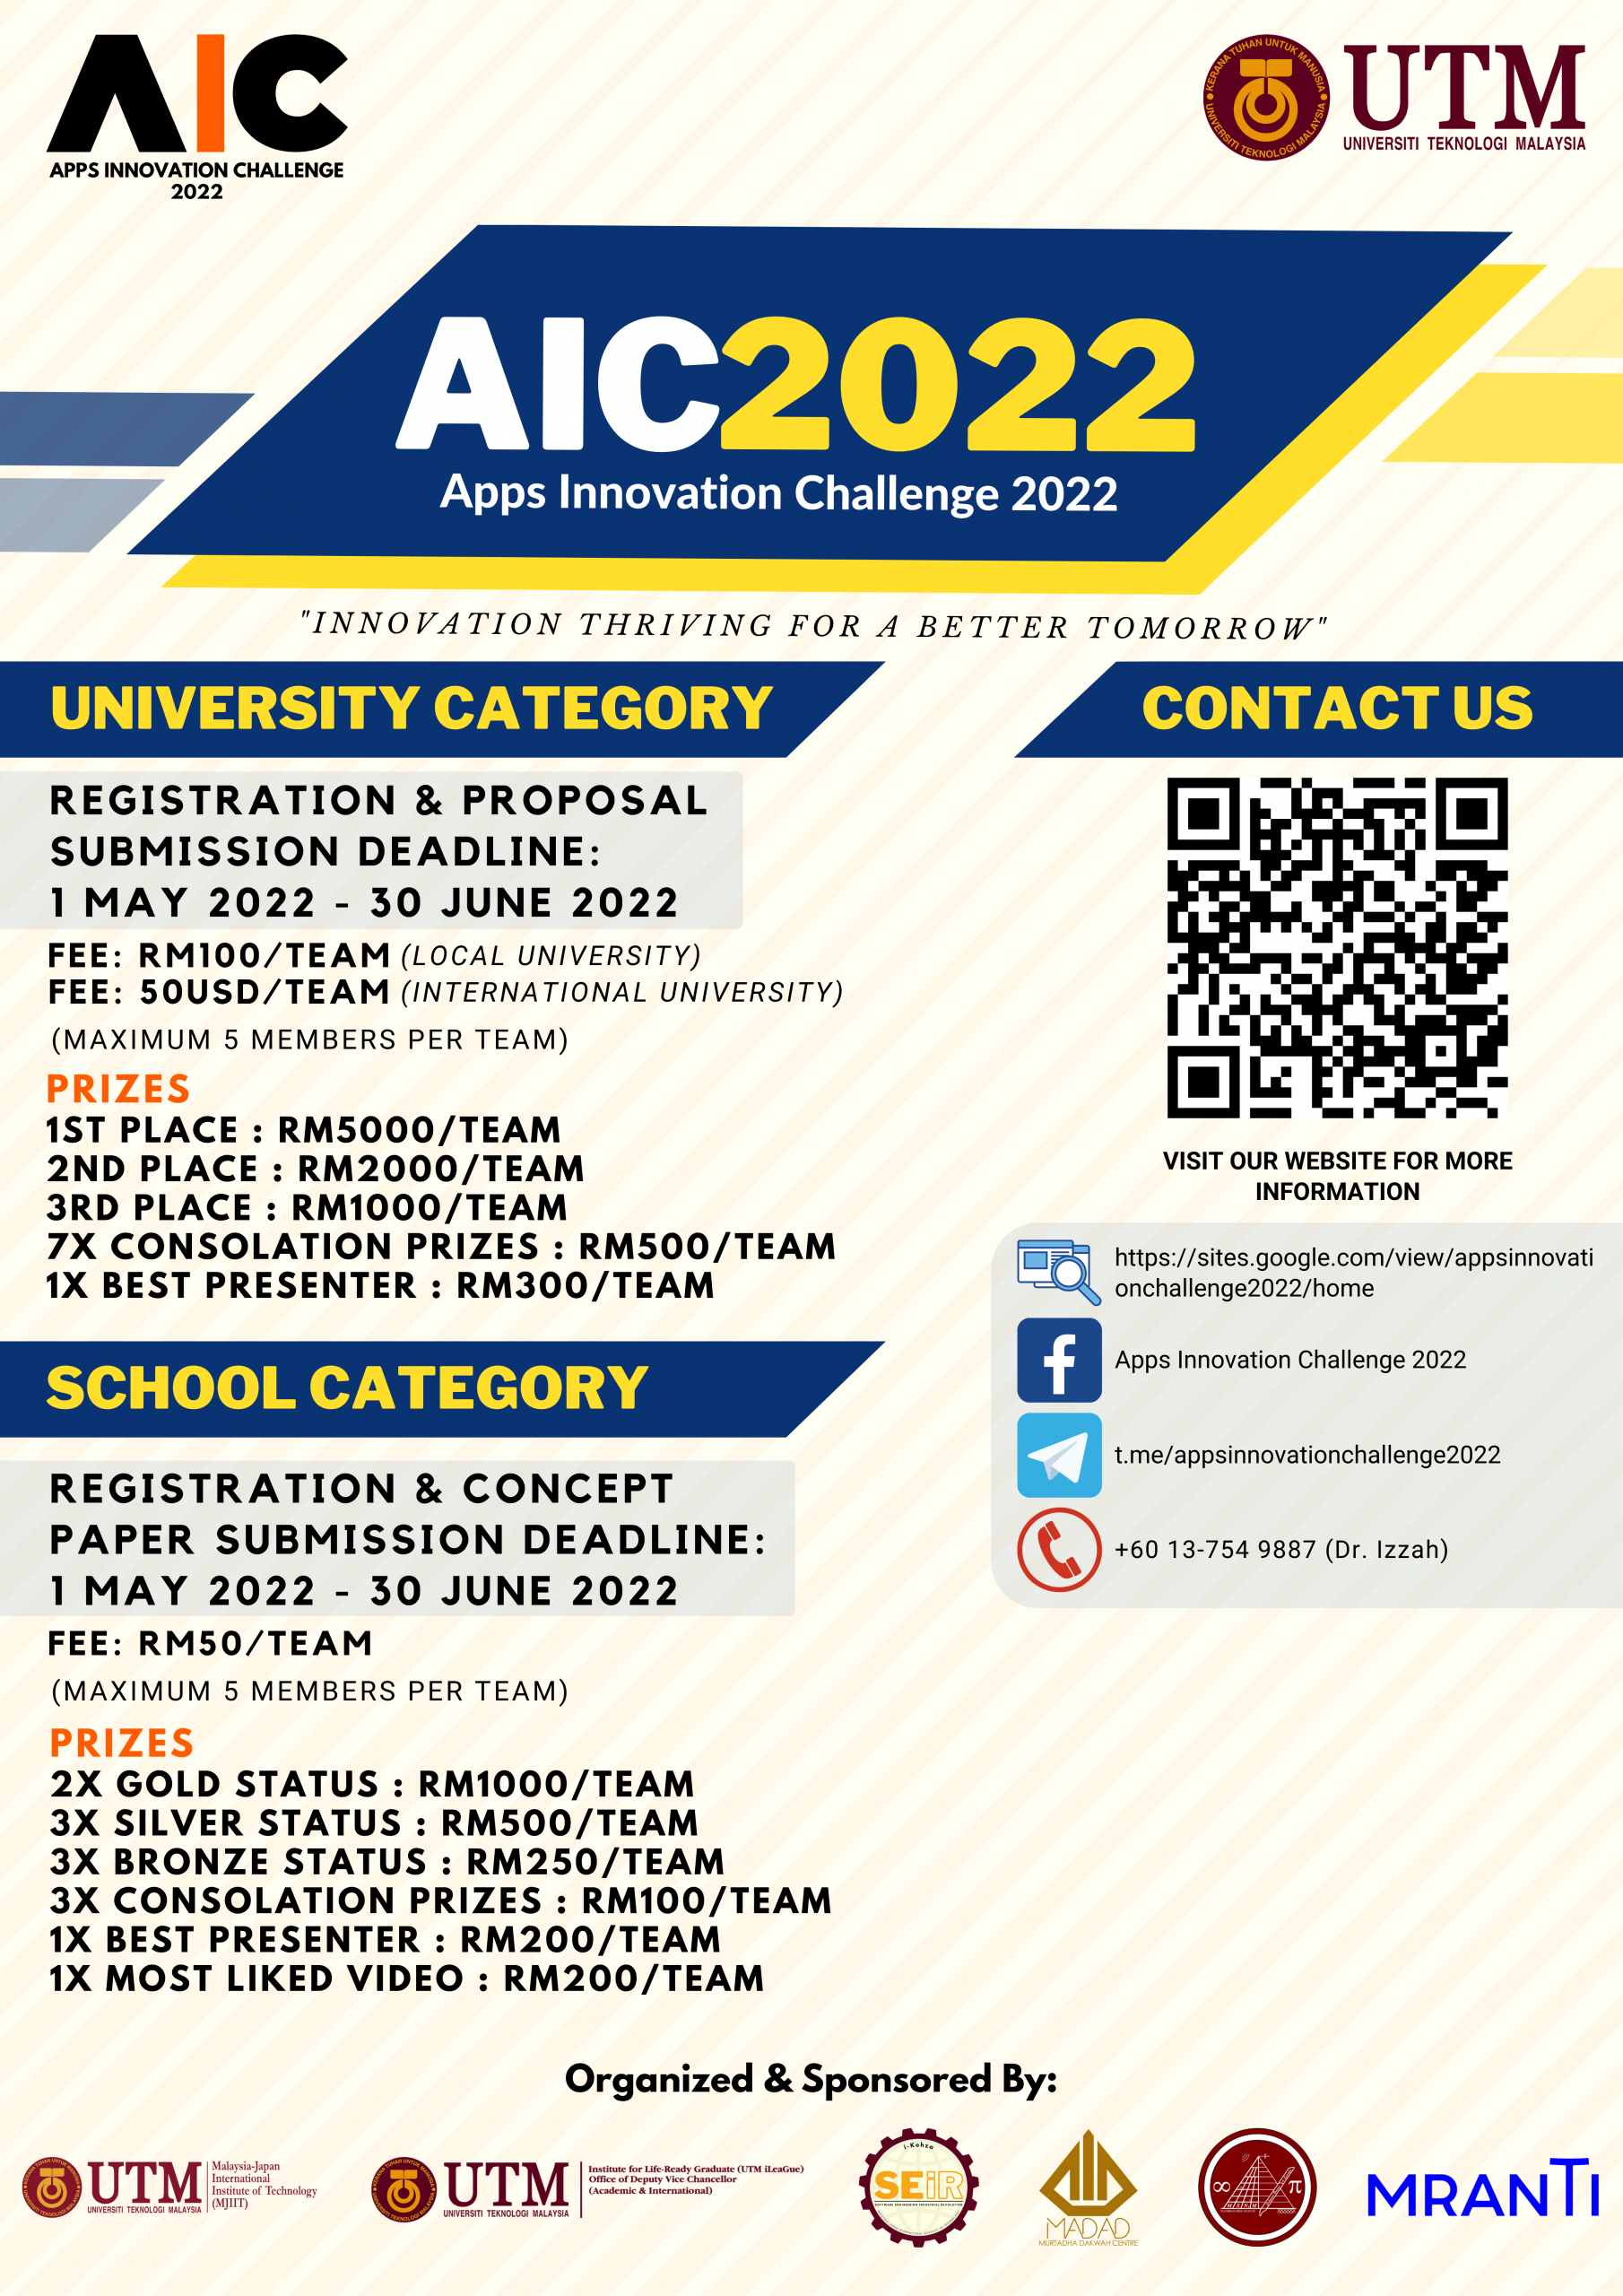 C ALL FOR STUDENTS’ PARTICIPATION > APPS INNOVATION CHALLENGE 2022 (AIC2022)